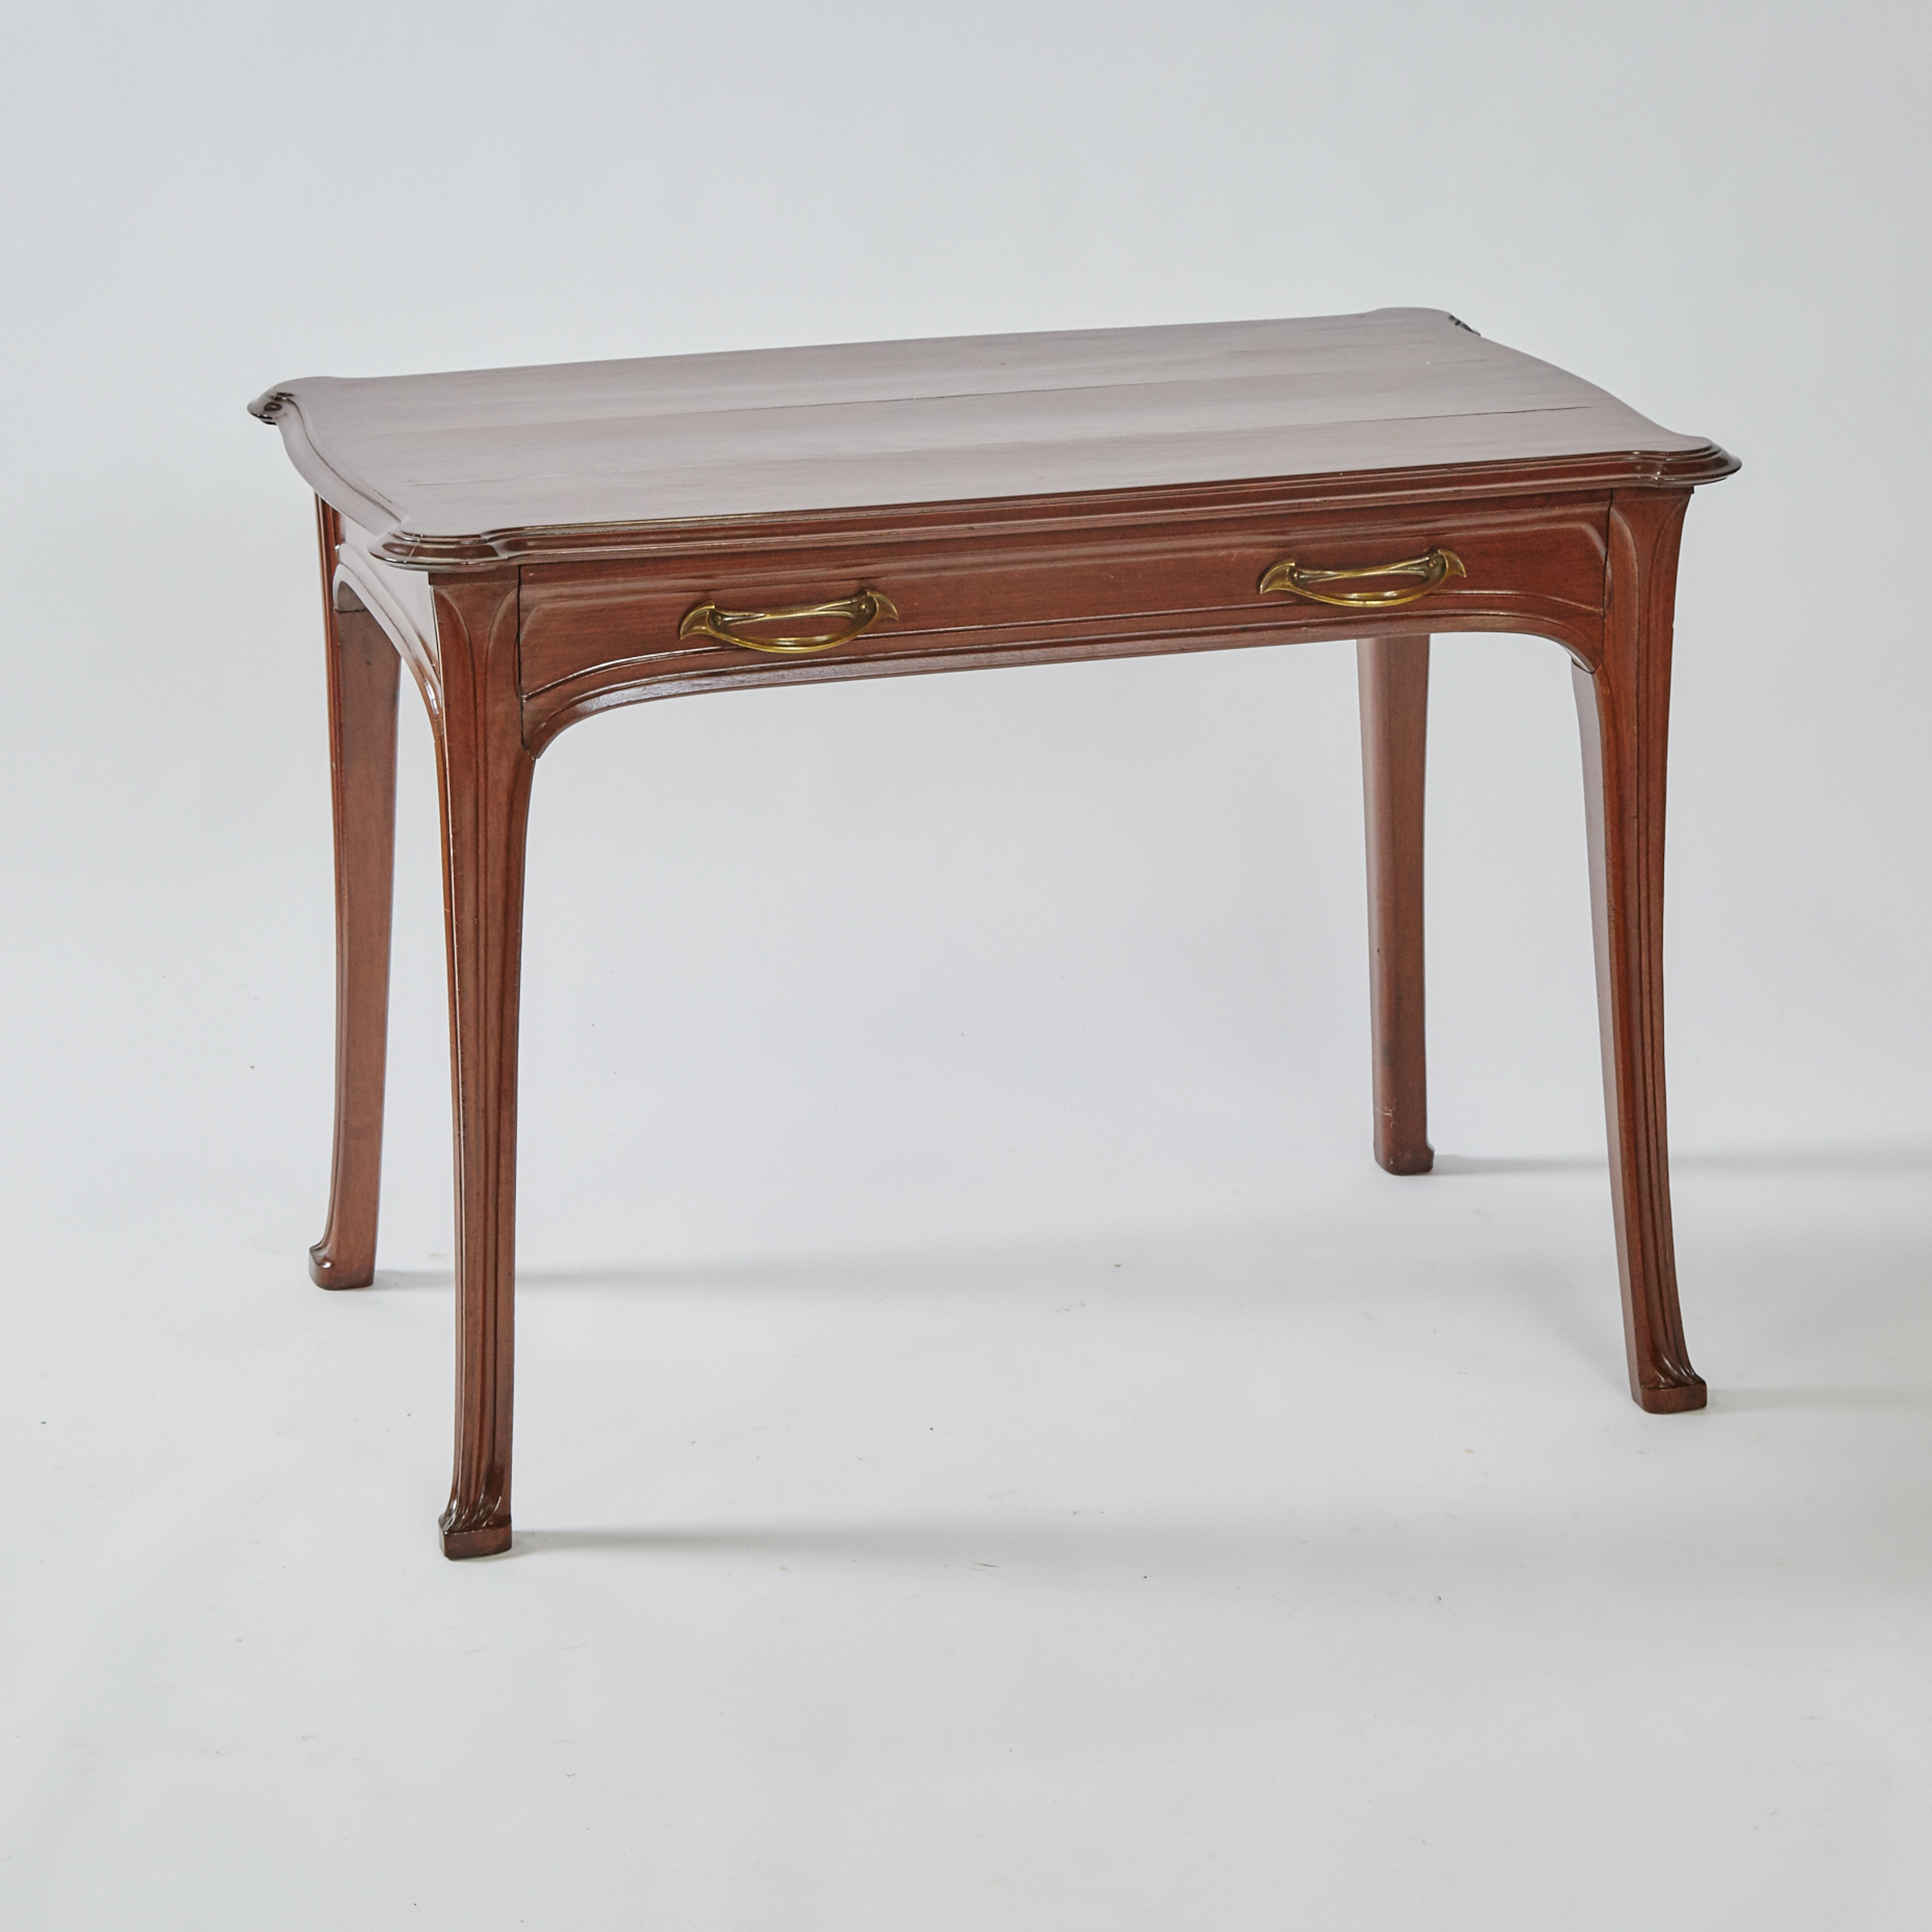 French Art Nouveau Carved Mahogany Writing Desk, 19th/early 20th century